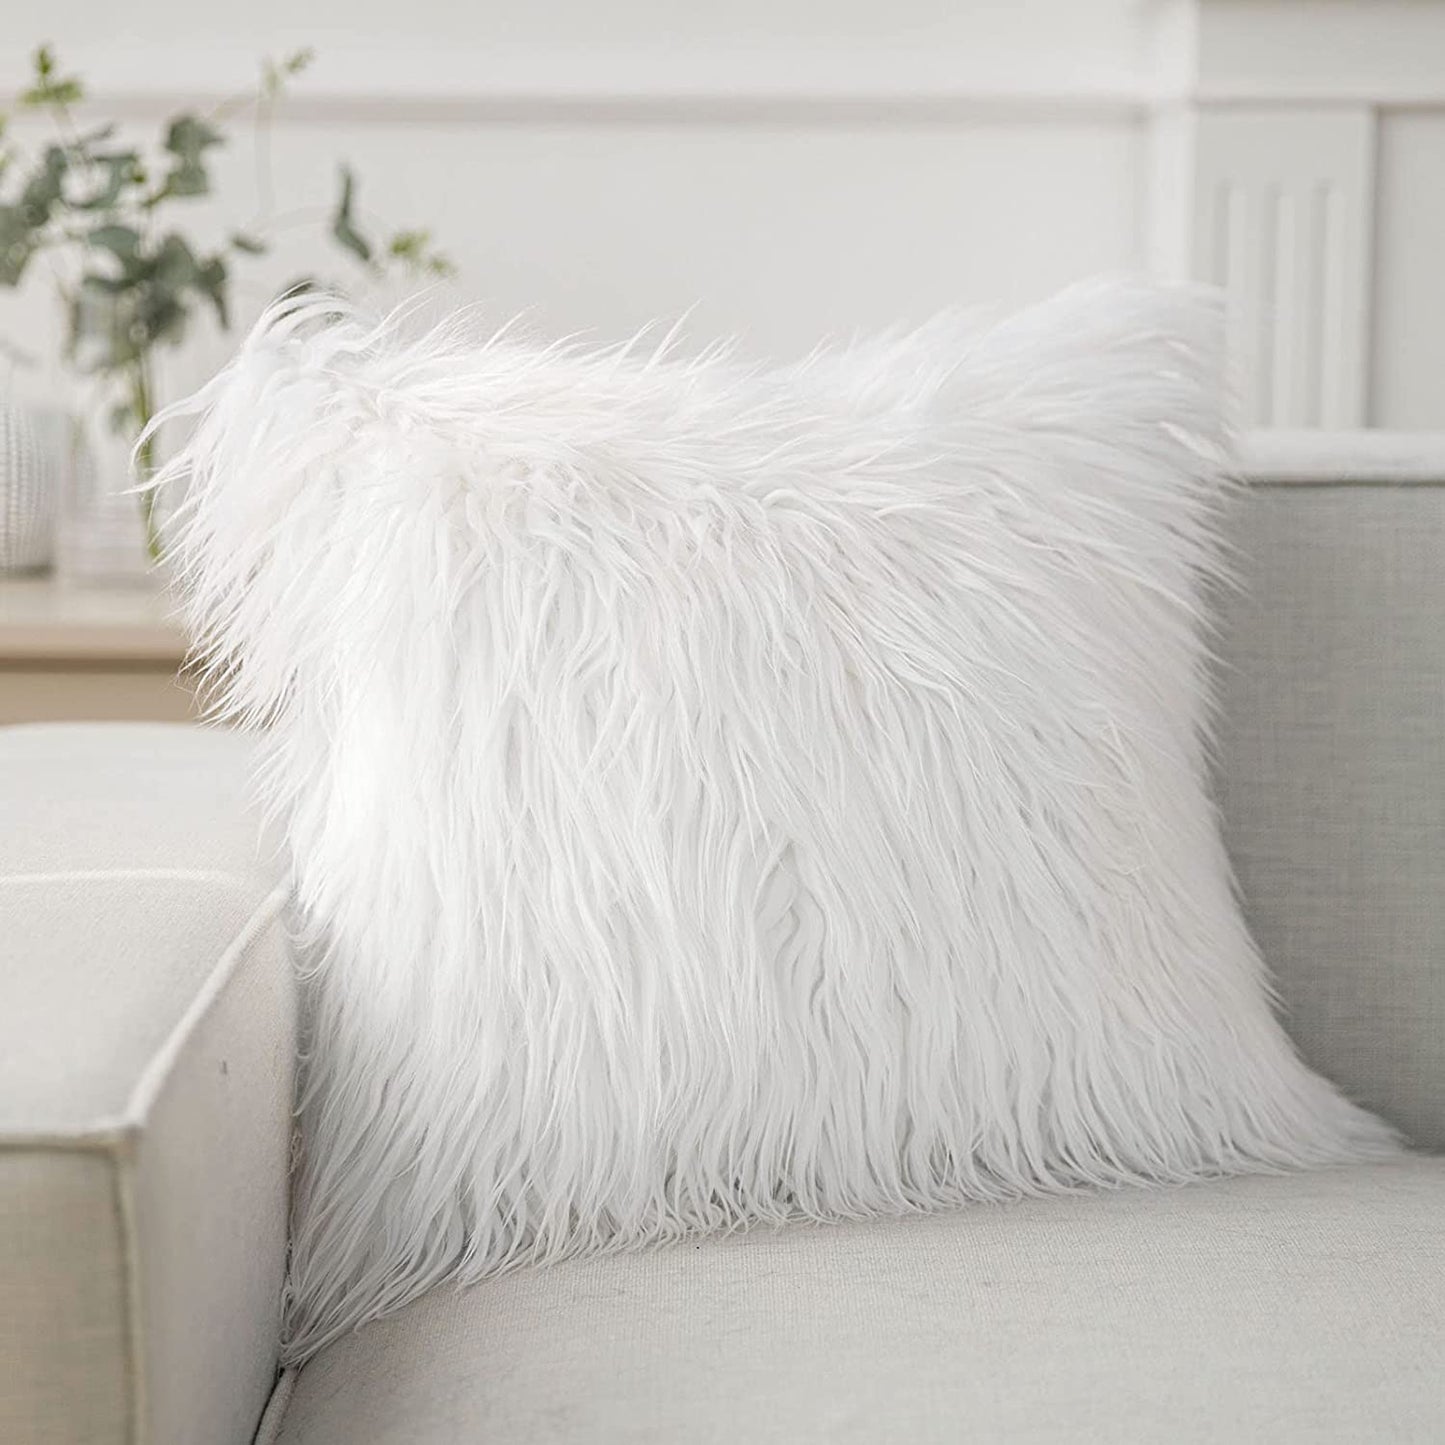 Faux Fur Solid Decorative Pillow Cover Fluffy Throw Pillow Mongolian Luxury Fuzzy Pillow Case Cushion Cover for Bedroom and Couch,True White 18 X 18 Inches